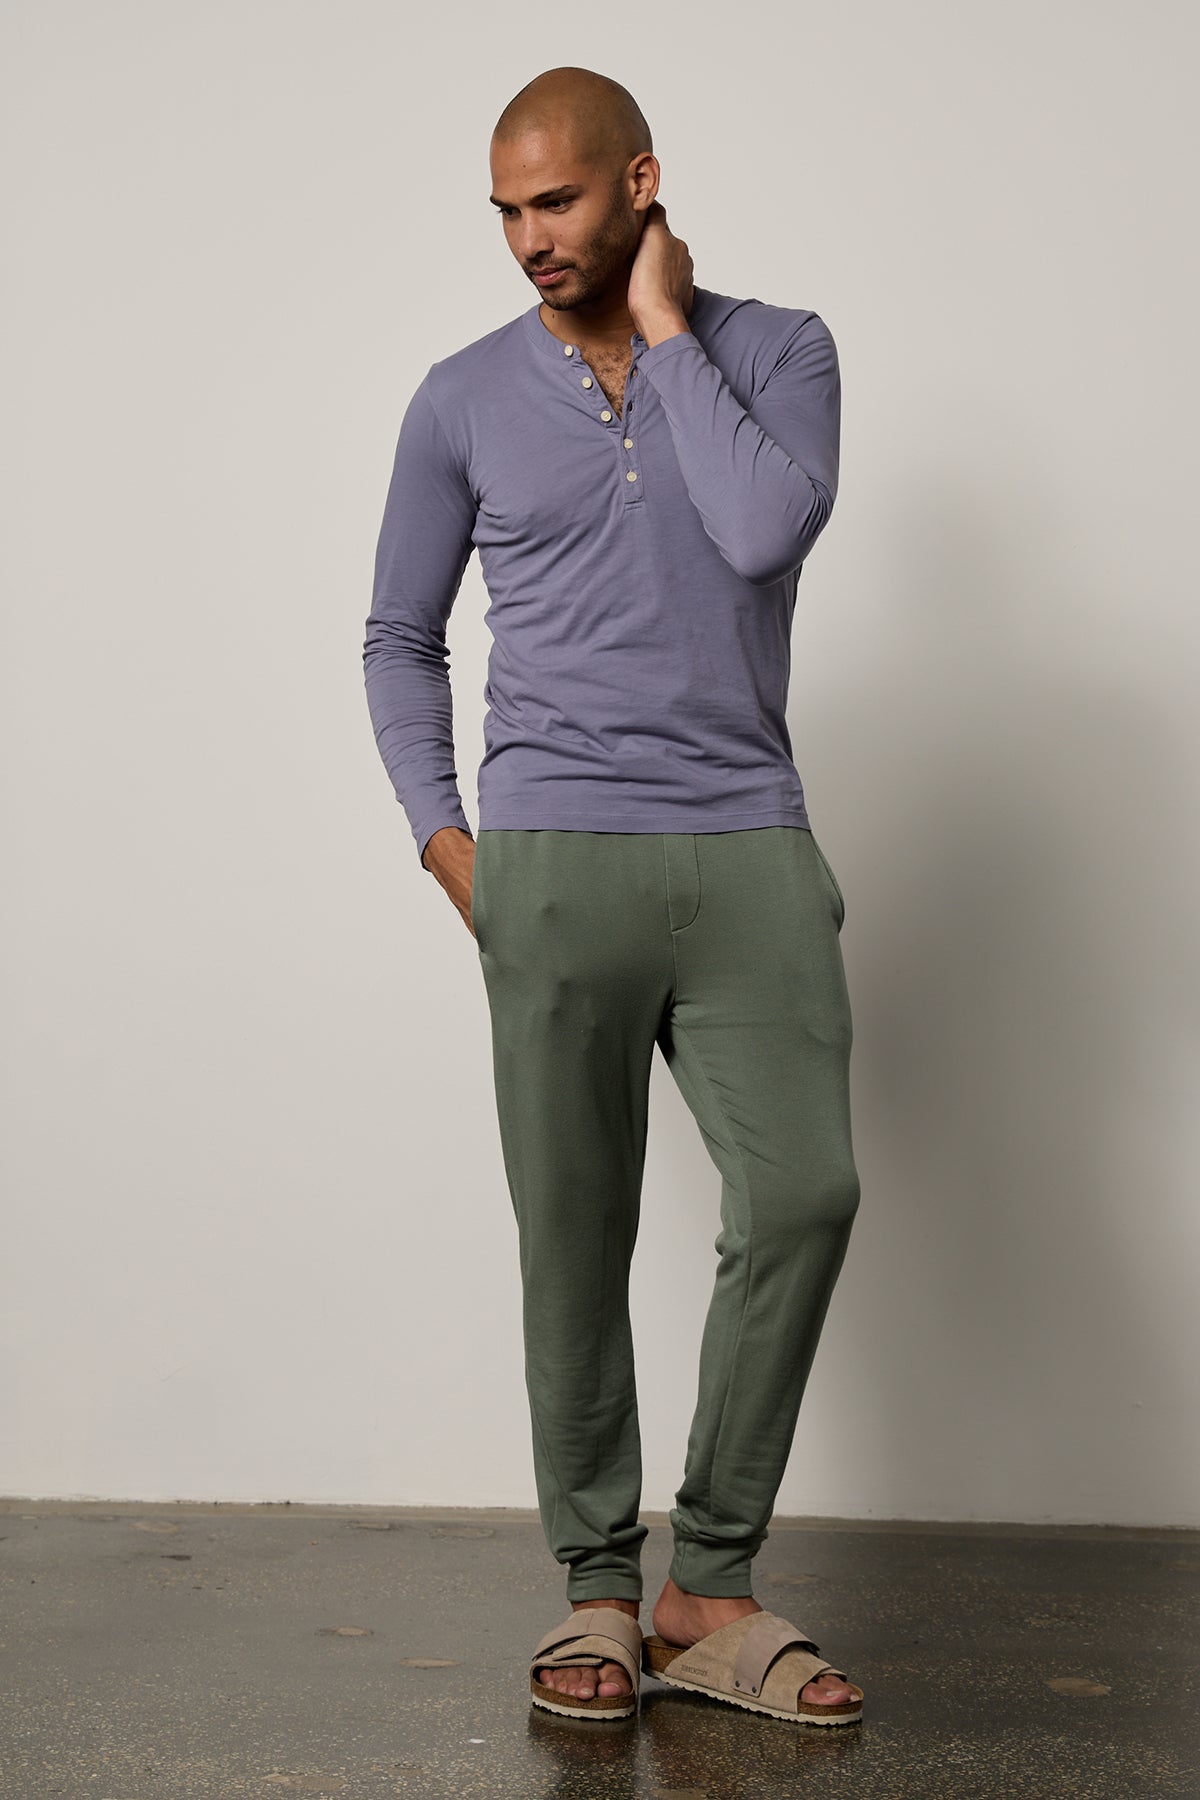 A man in a purple t-shirt and green Velvet by Graham & Spencer sweatpants for workouts, wearing the Crosby Luxe Fleece Jogger.-26630188040385